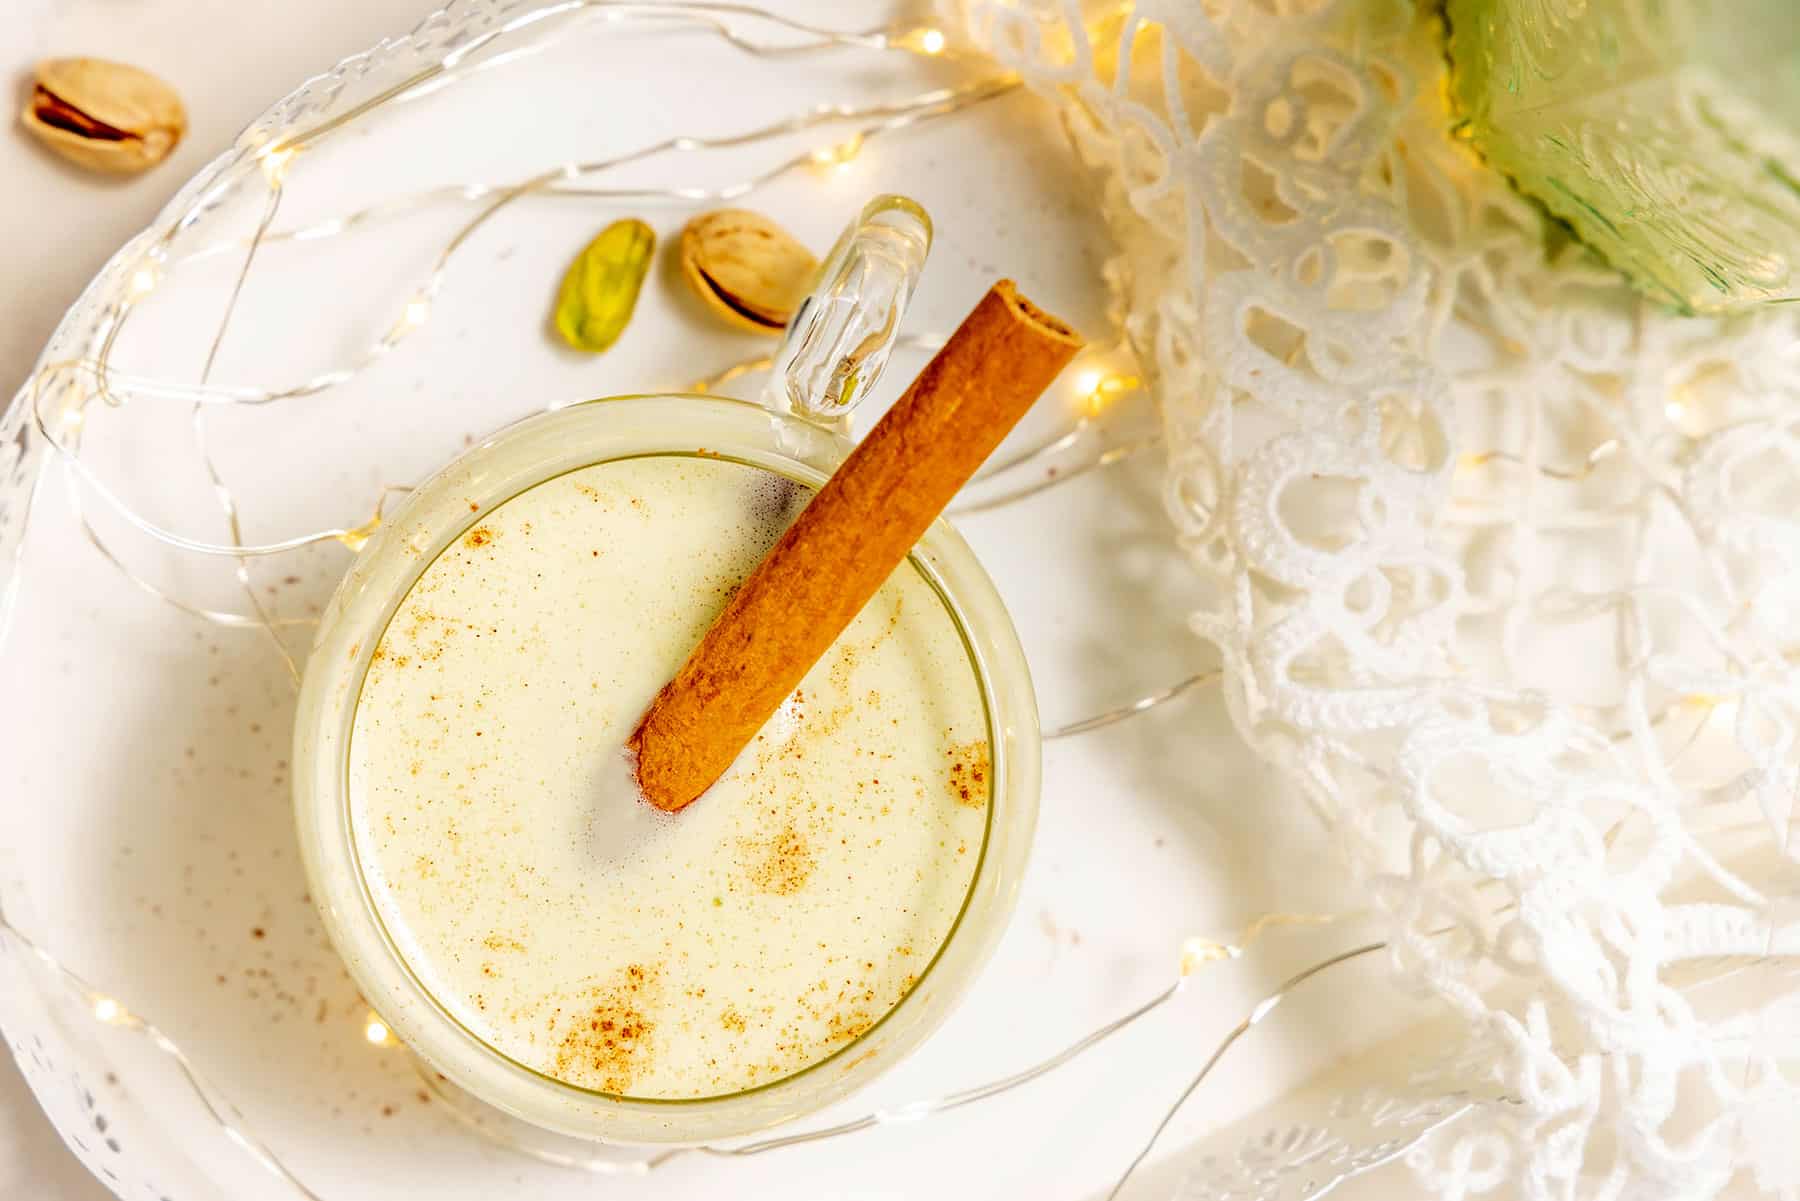 Coquito served with cinnamon stick.